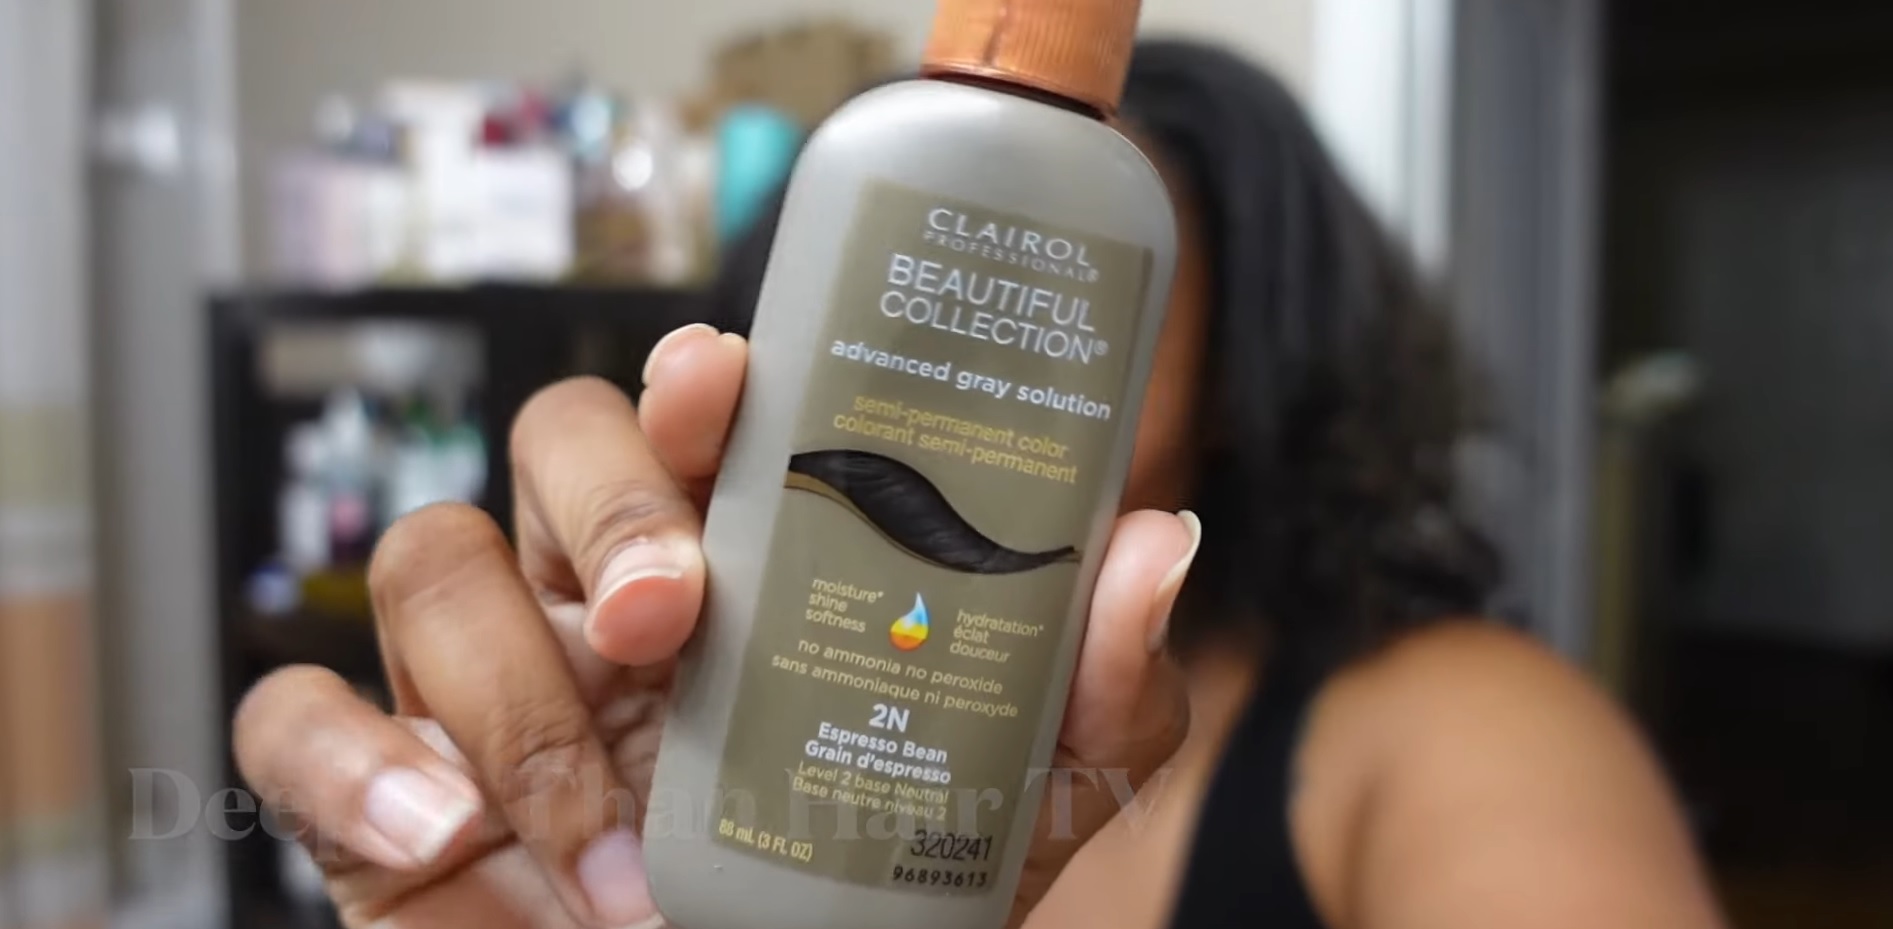 Covering Grey with Clairol Beautiful Collection